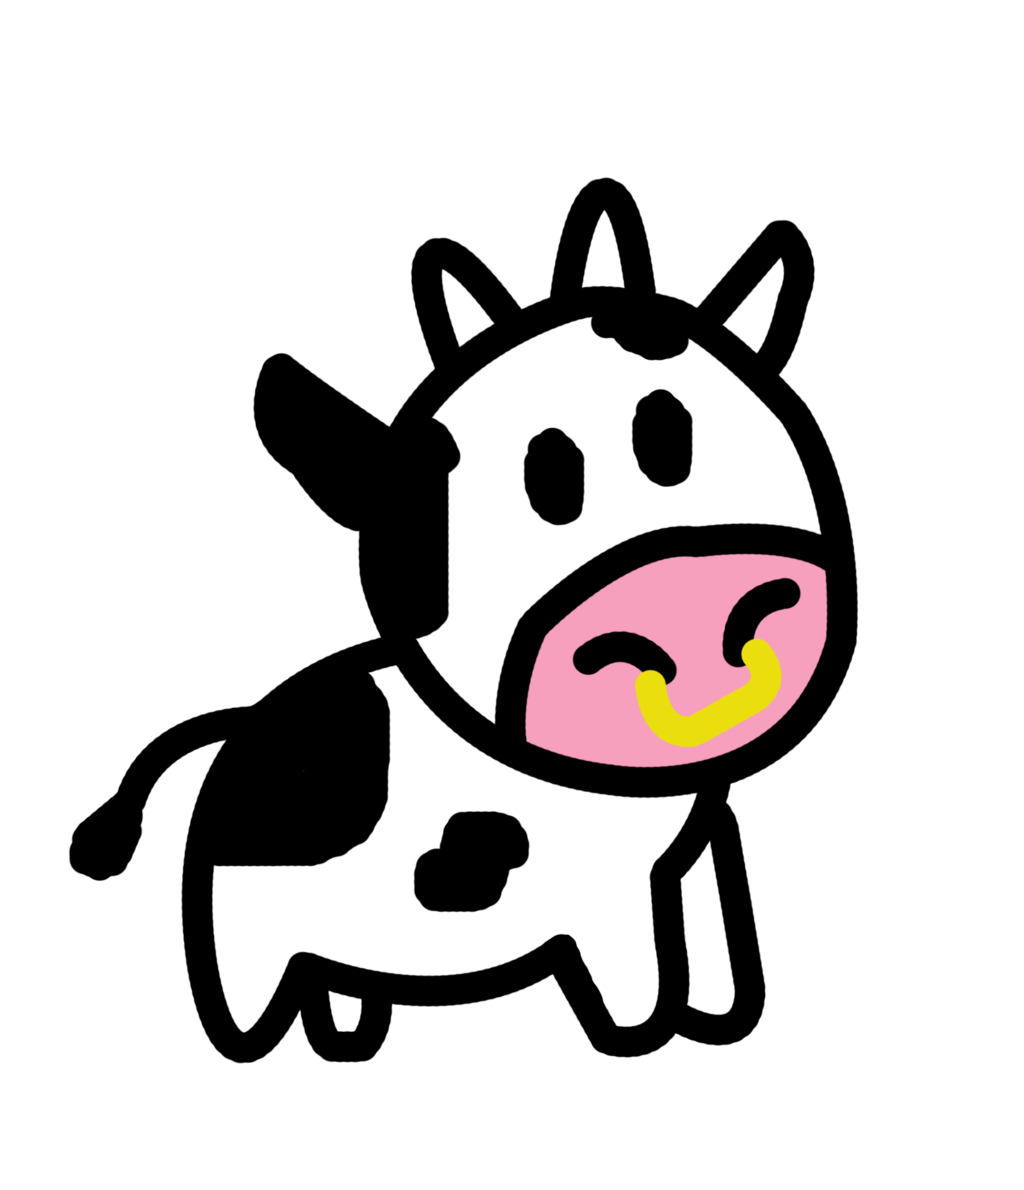 Clipart cows simple